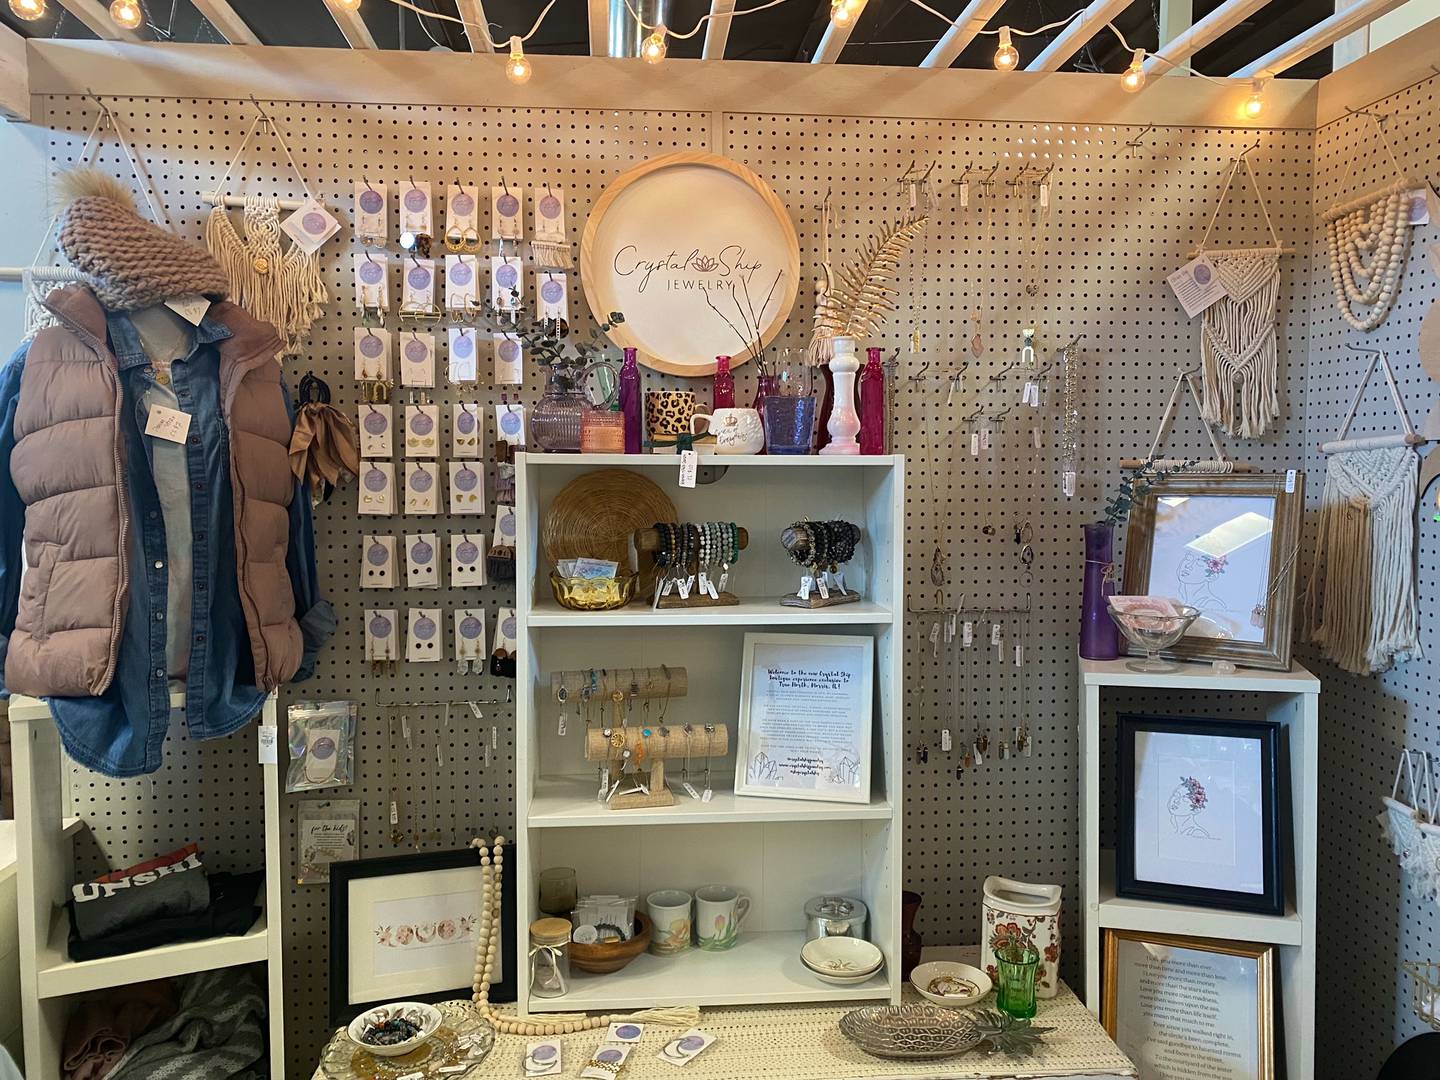 Crystal Ship Jewelry's space at True North. For more information visit https://crystalshipjewelry.square.site/